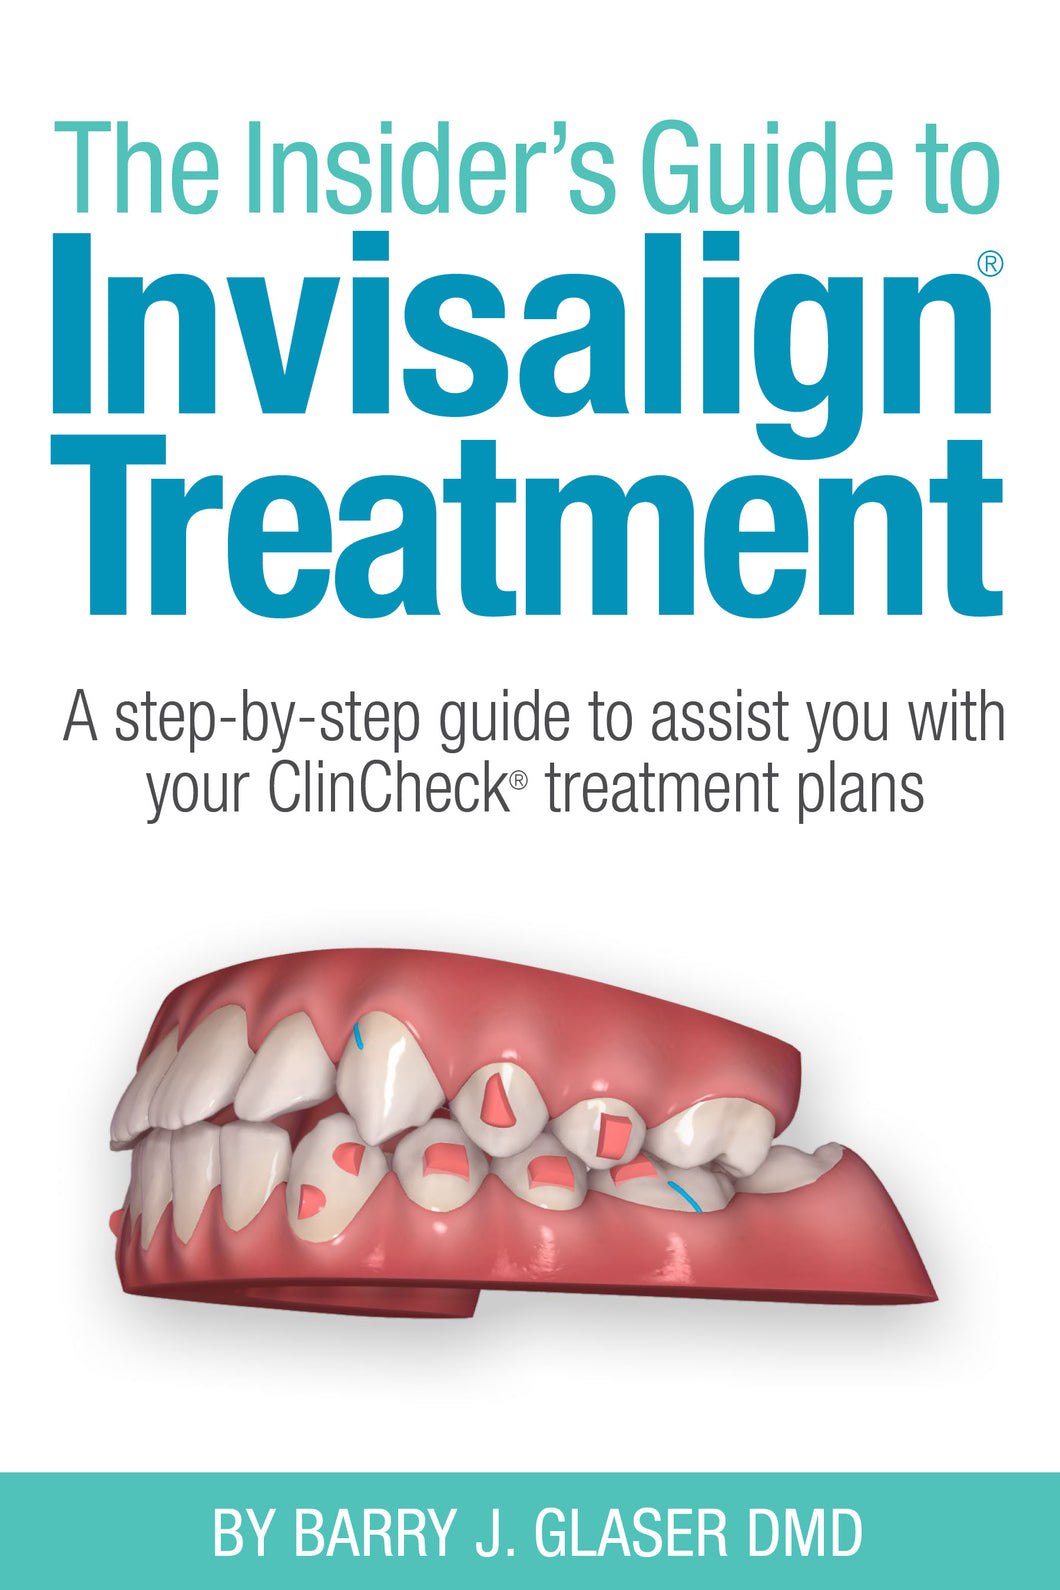 Insider's Guide to Invisalign Treatment (INTERNATIONAL ORDERS ONLY